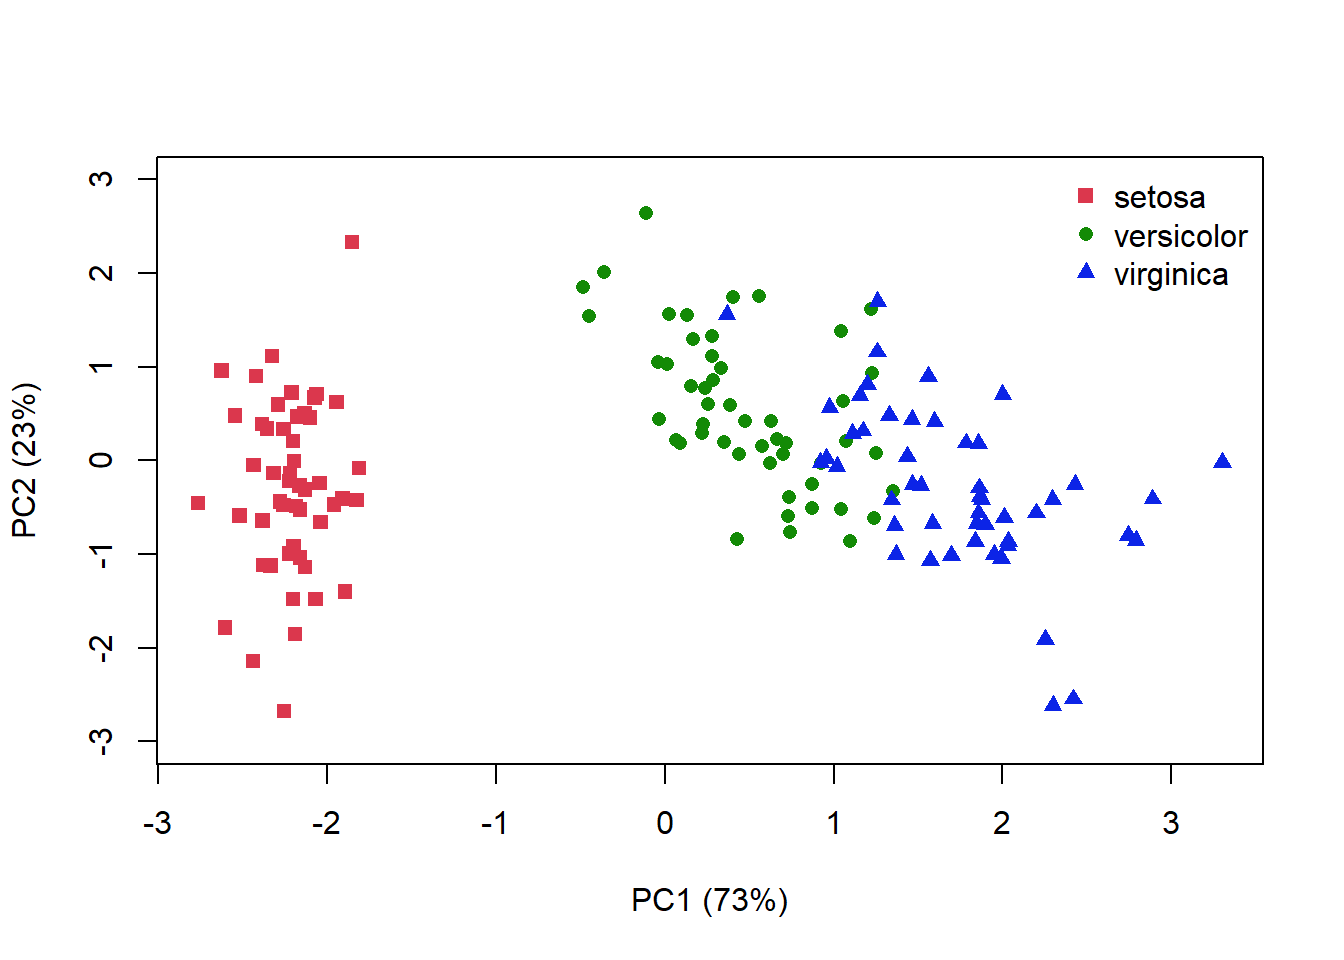 This figure shows a scatterplot with x-axis labelled 'PC1 (73%)' and y-axis labelled 'PC2 (23%)'. From left to right on the x-axis, the plot shows a cluster of 'setosa' points, 'versicolor' points, to 'virginica' points.